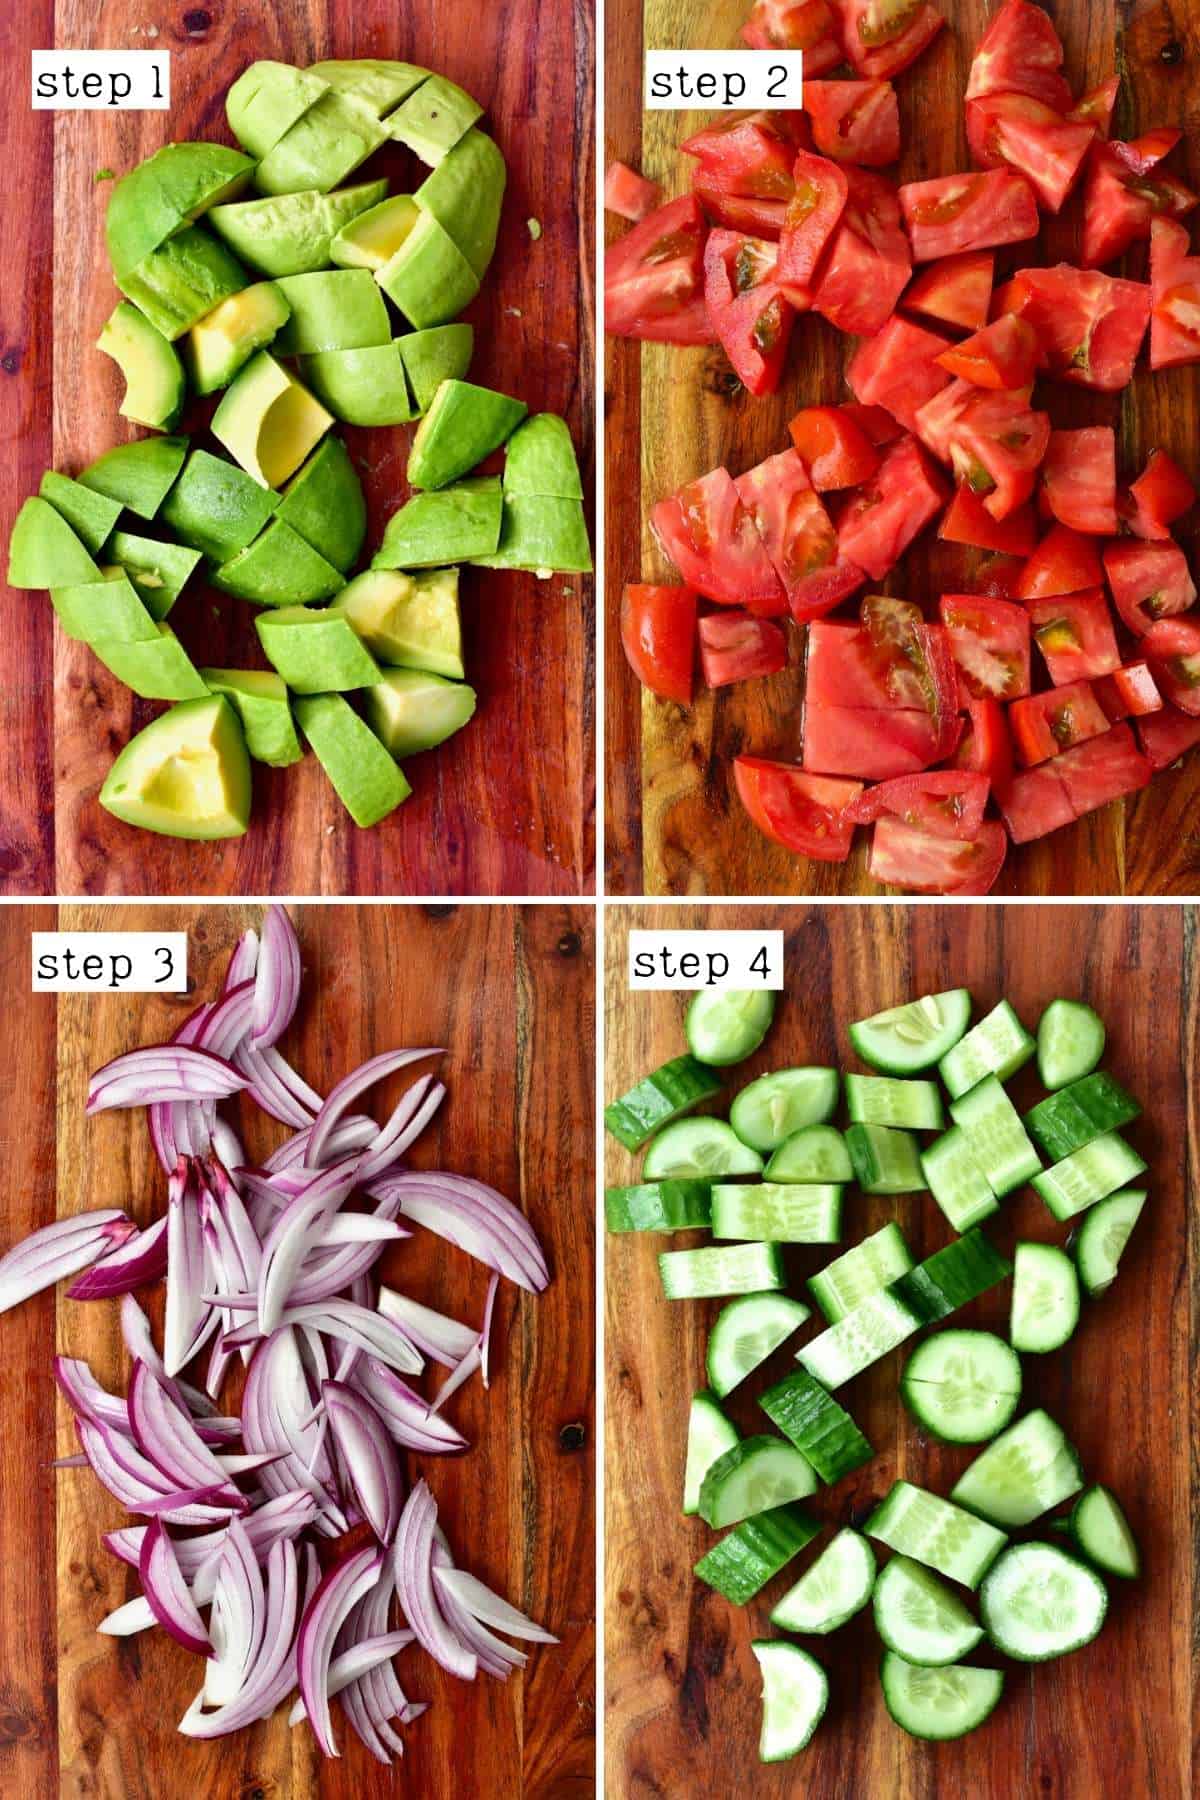 Steps for cutting vegetables